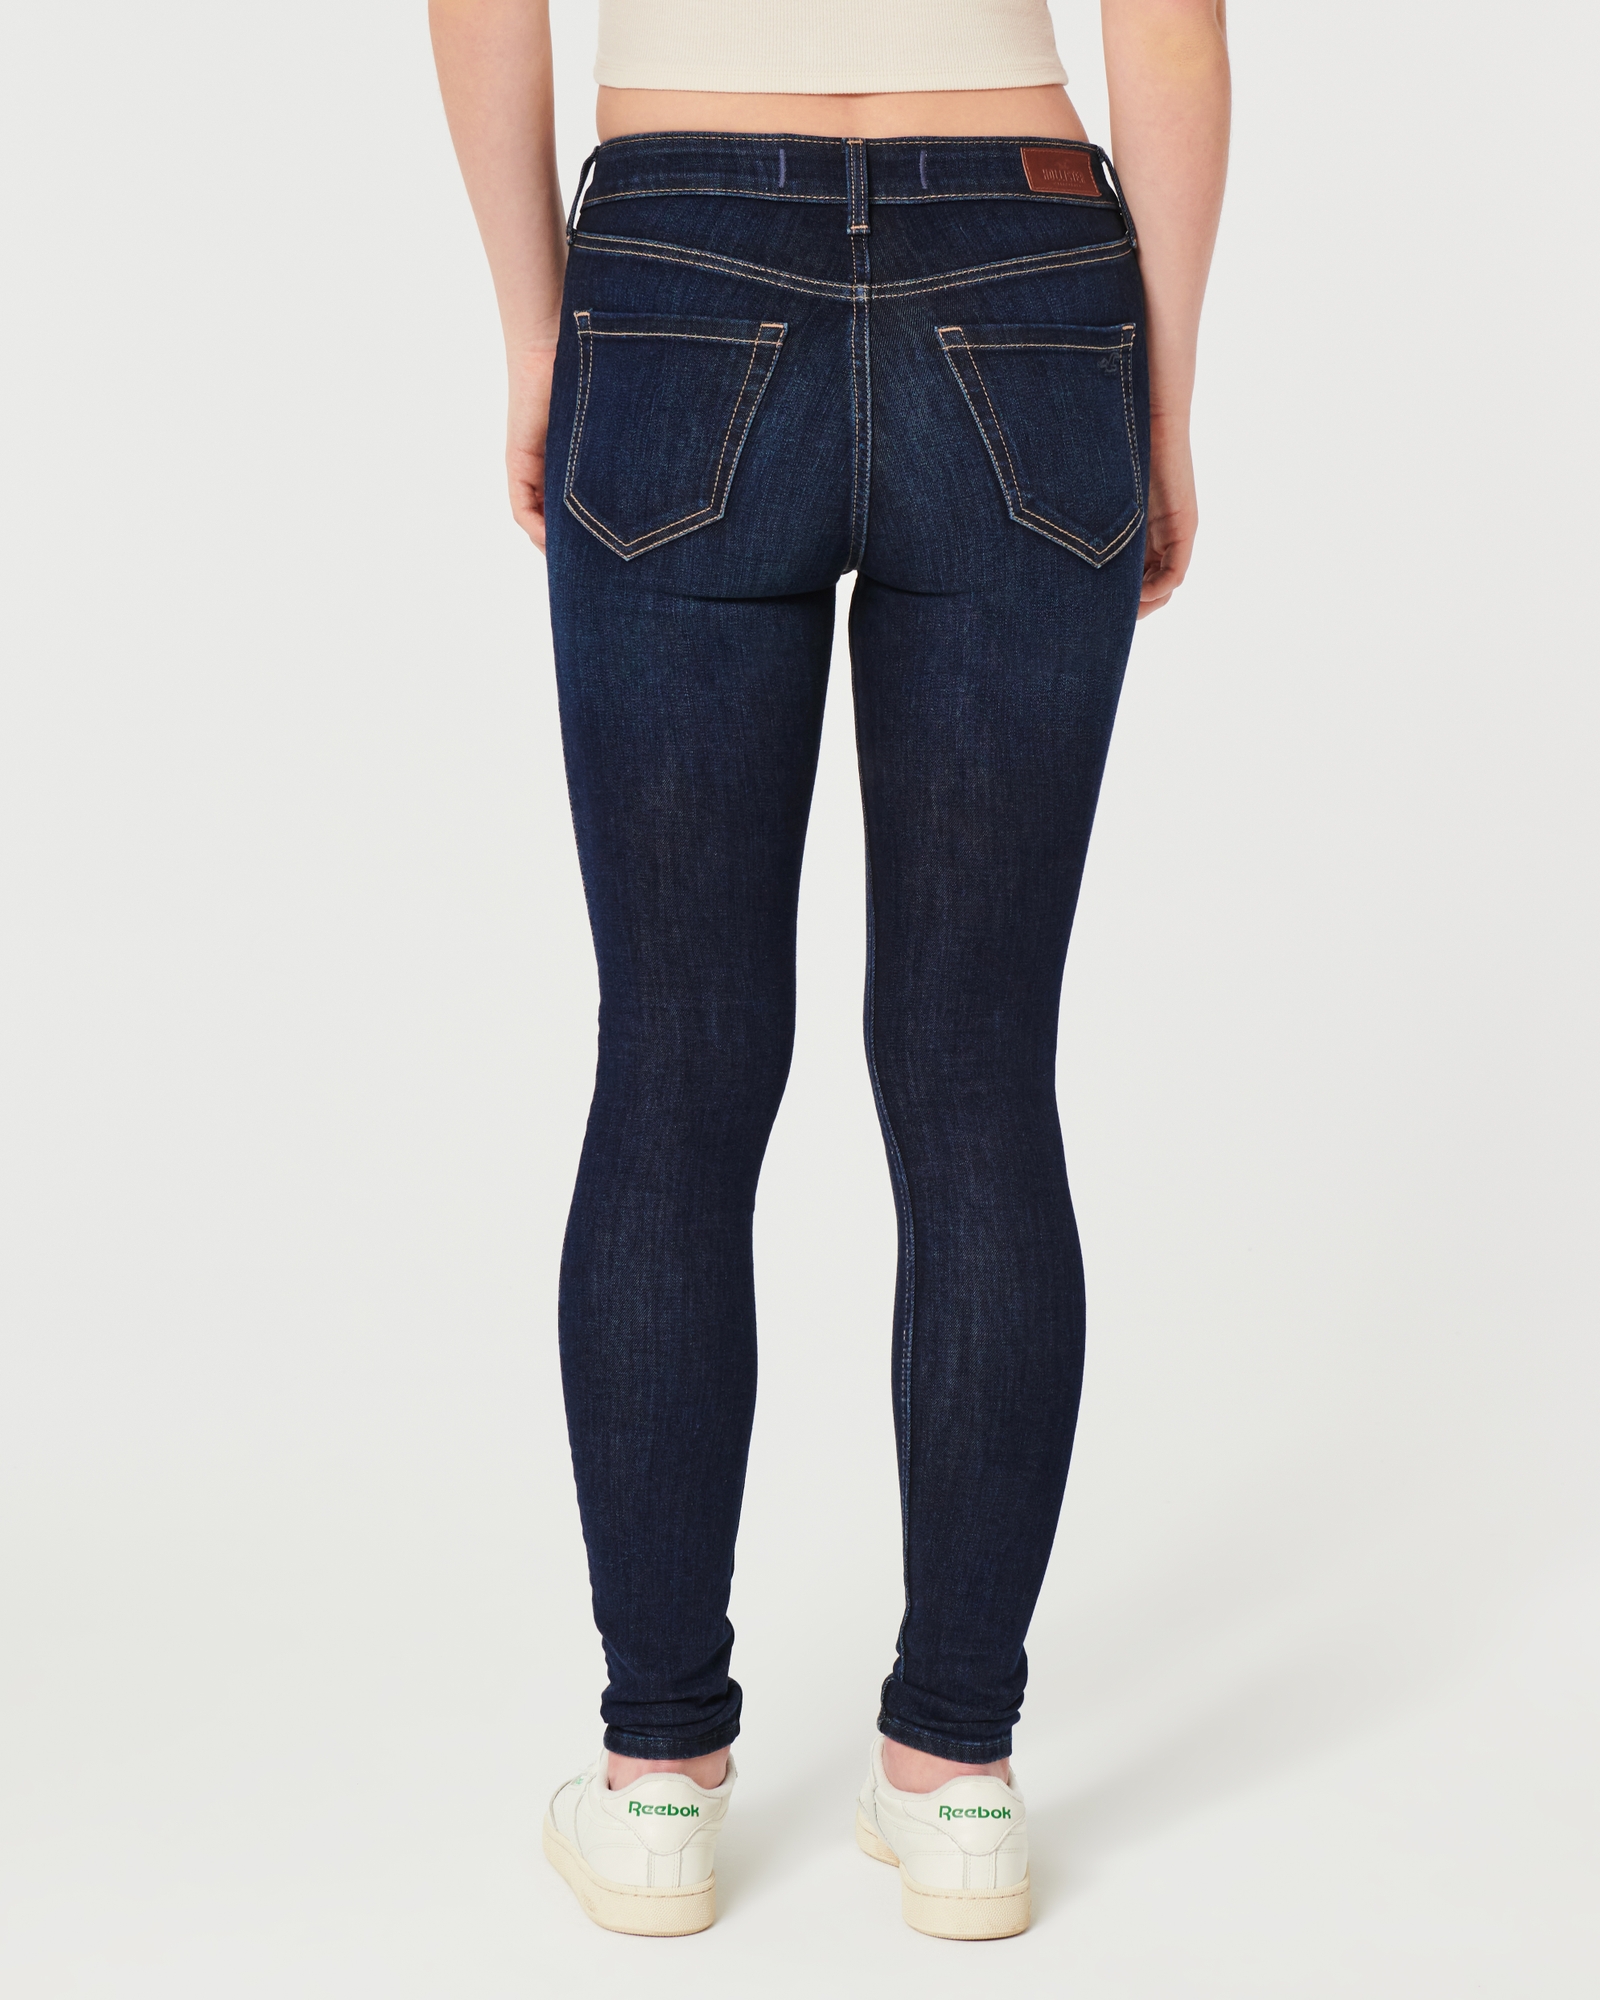 Hollister Co. Curvy Relaxed Jeans for Women